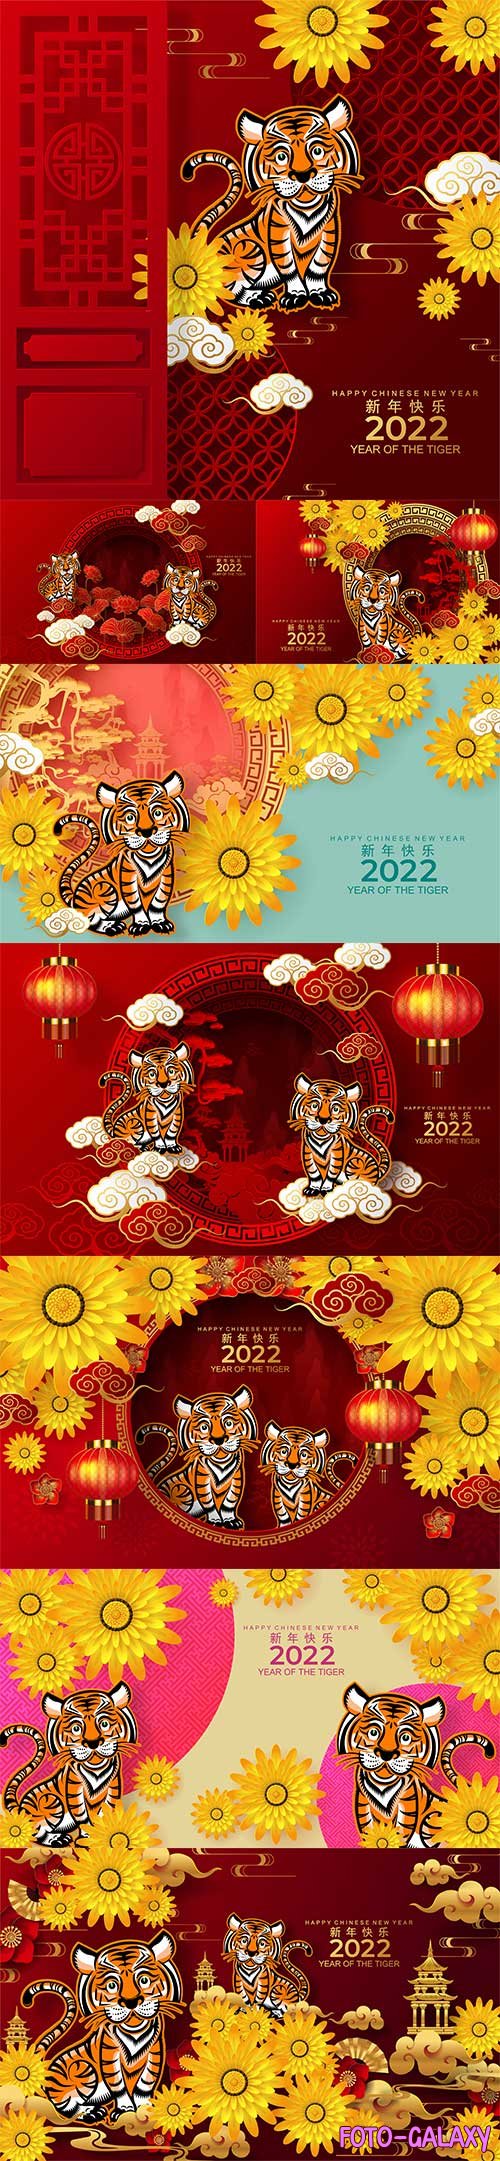 Chinese new year 2022 year of the tiger in vector